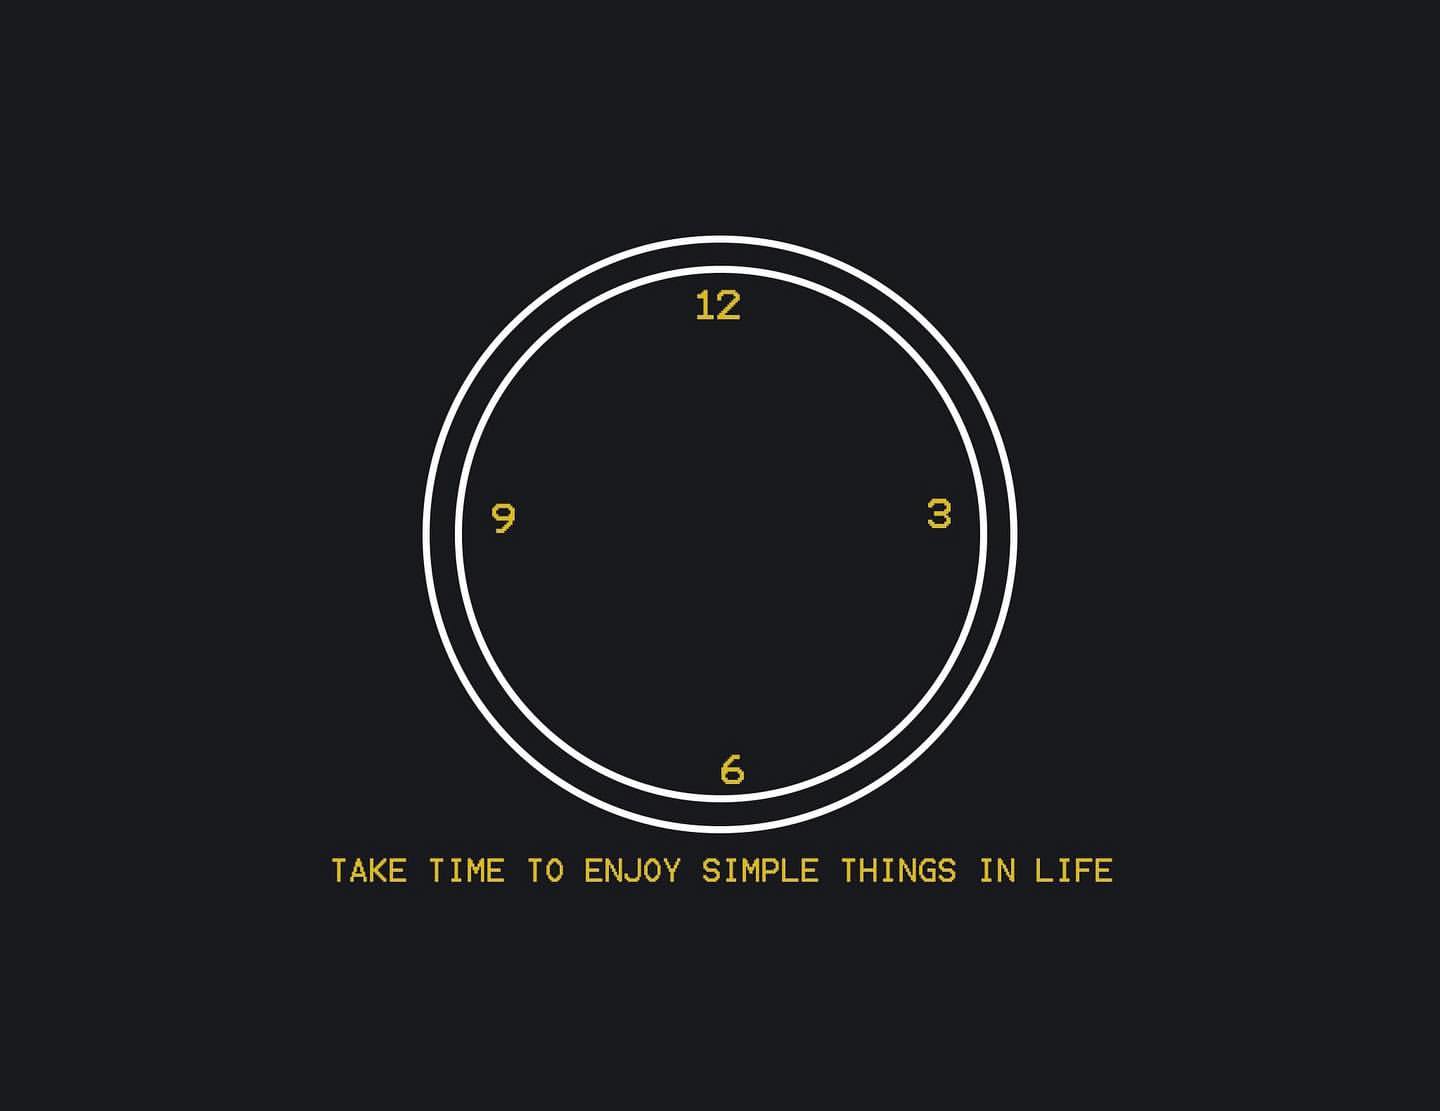 Take time to enjoy simple things in life.